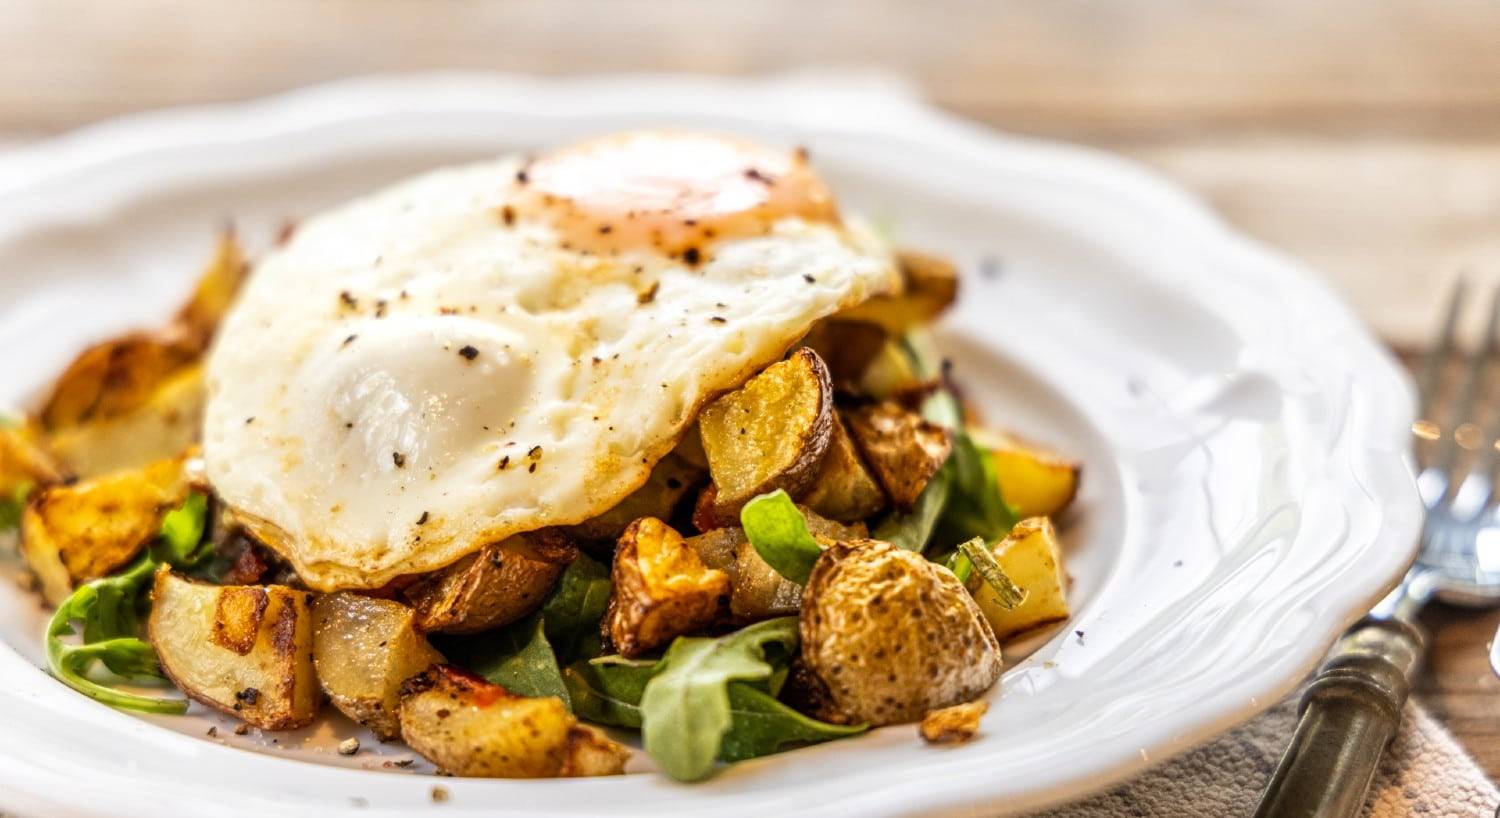 A breakfast hash of diced potatoes and greens with two fried eggs on a decorative white plate